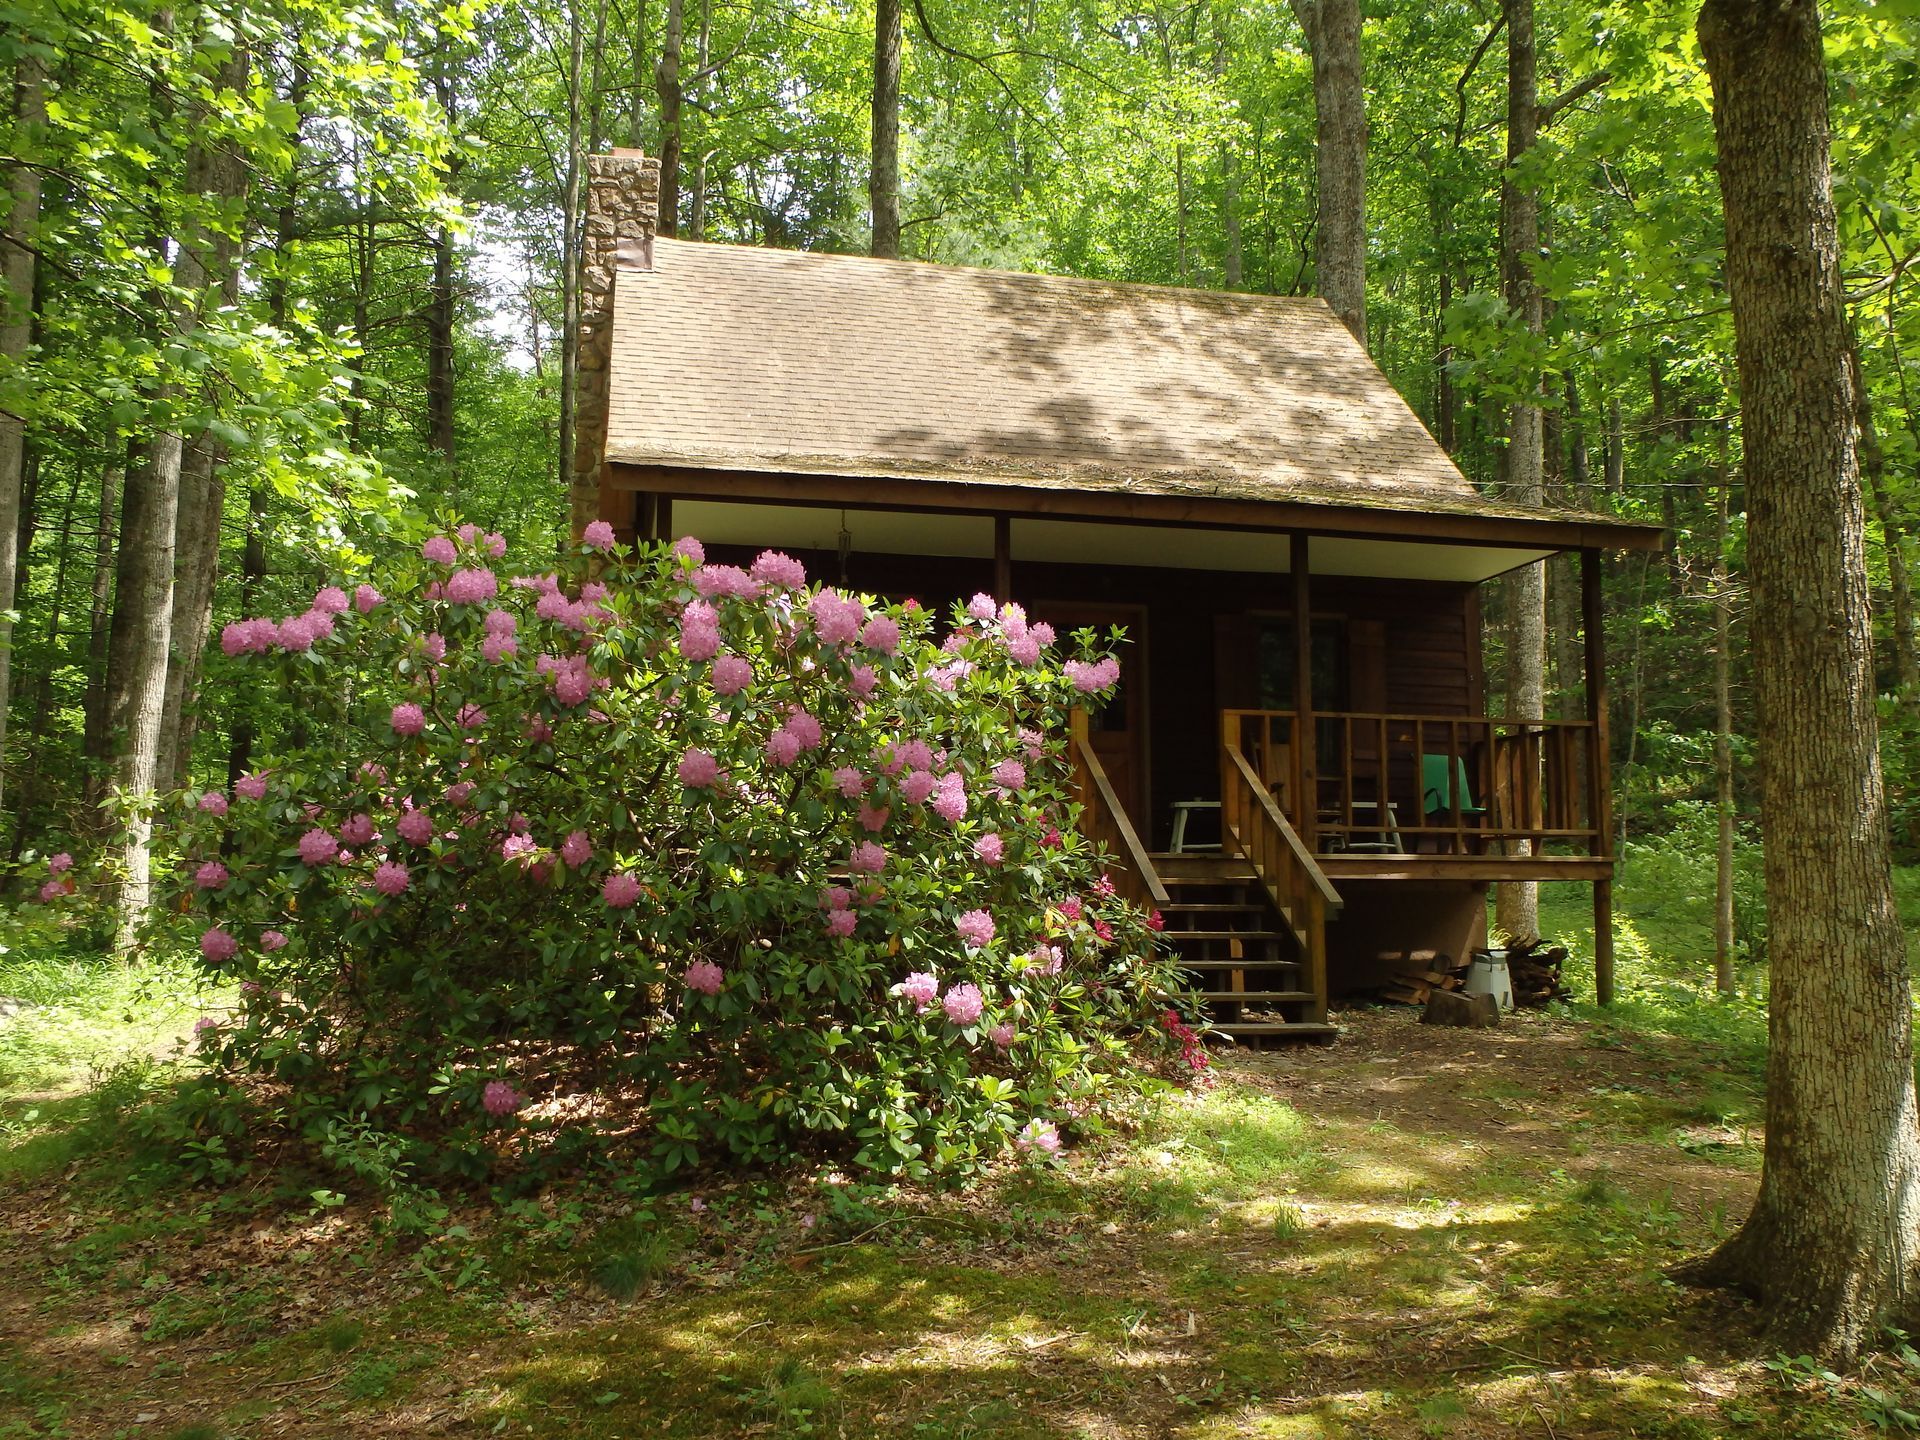 An exterior view of the Huntley cabin featuring flowers and vegetation.